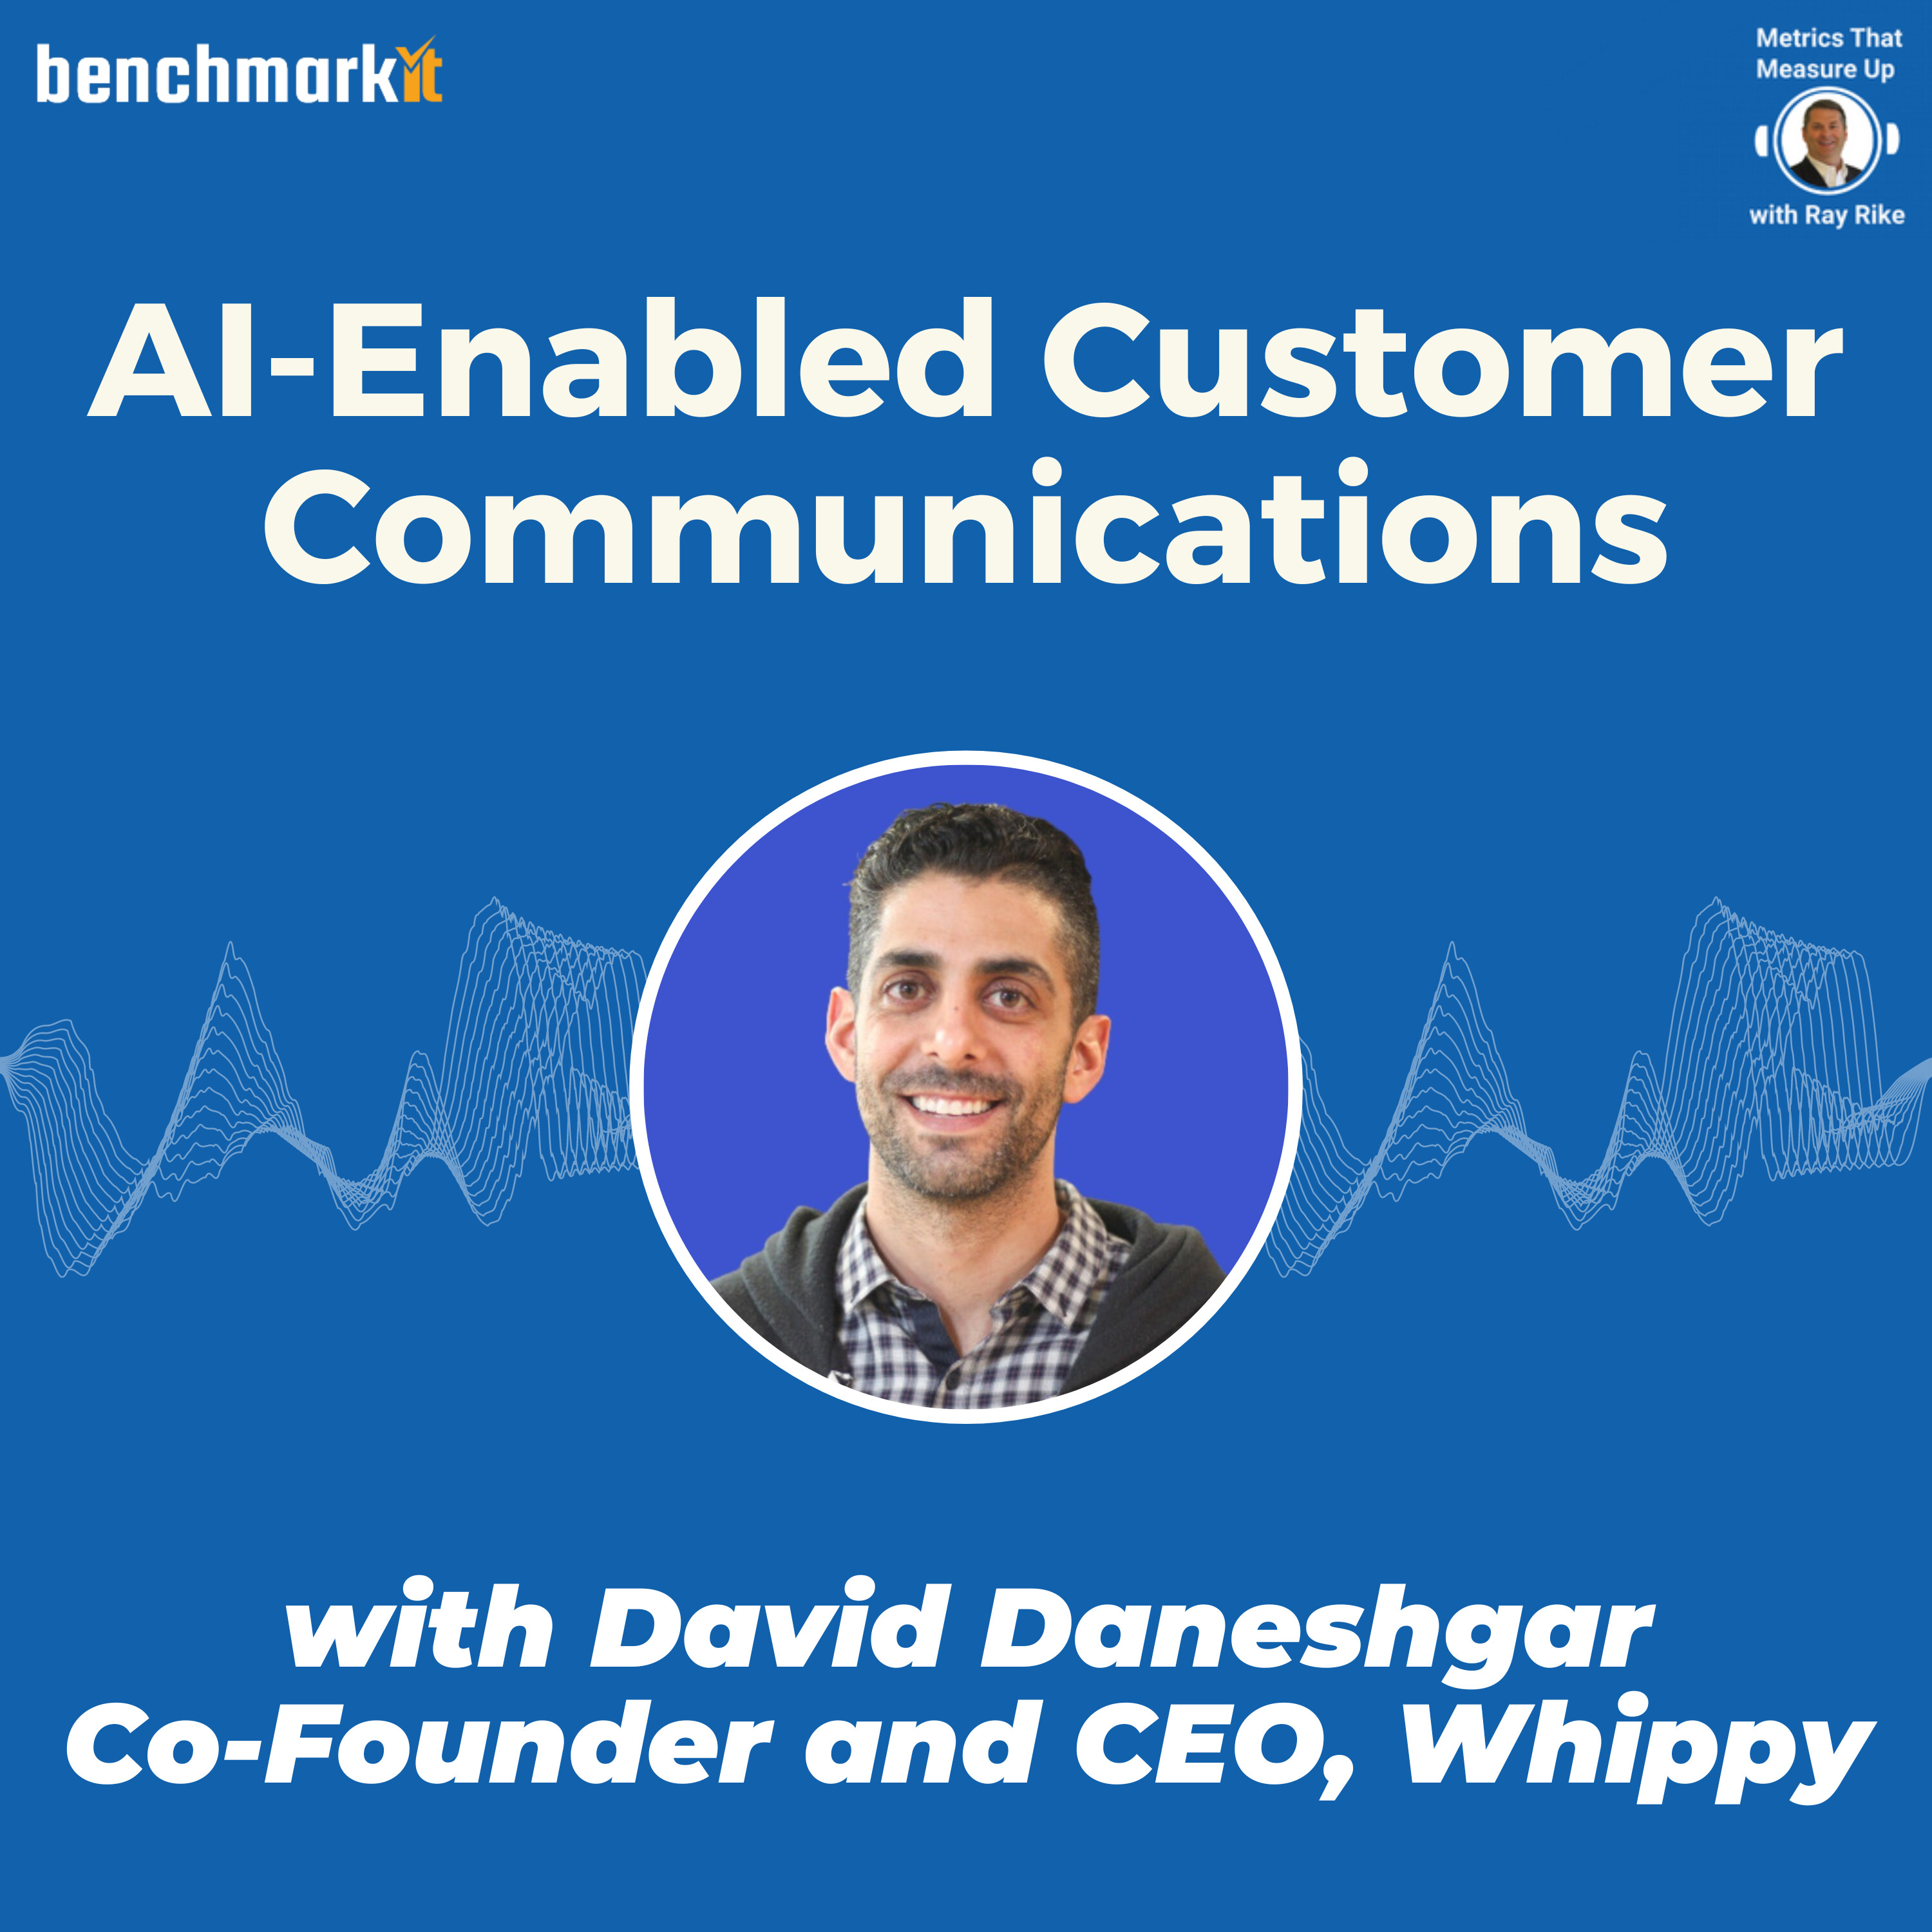 AI Enabled Customer Communications - with David Daneshgar, Co-Founder and CEO Whippy